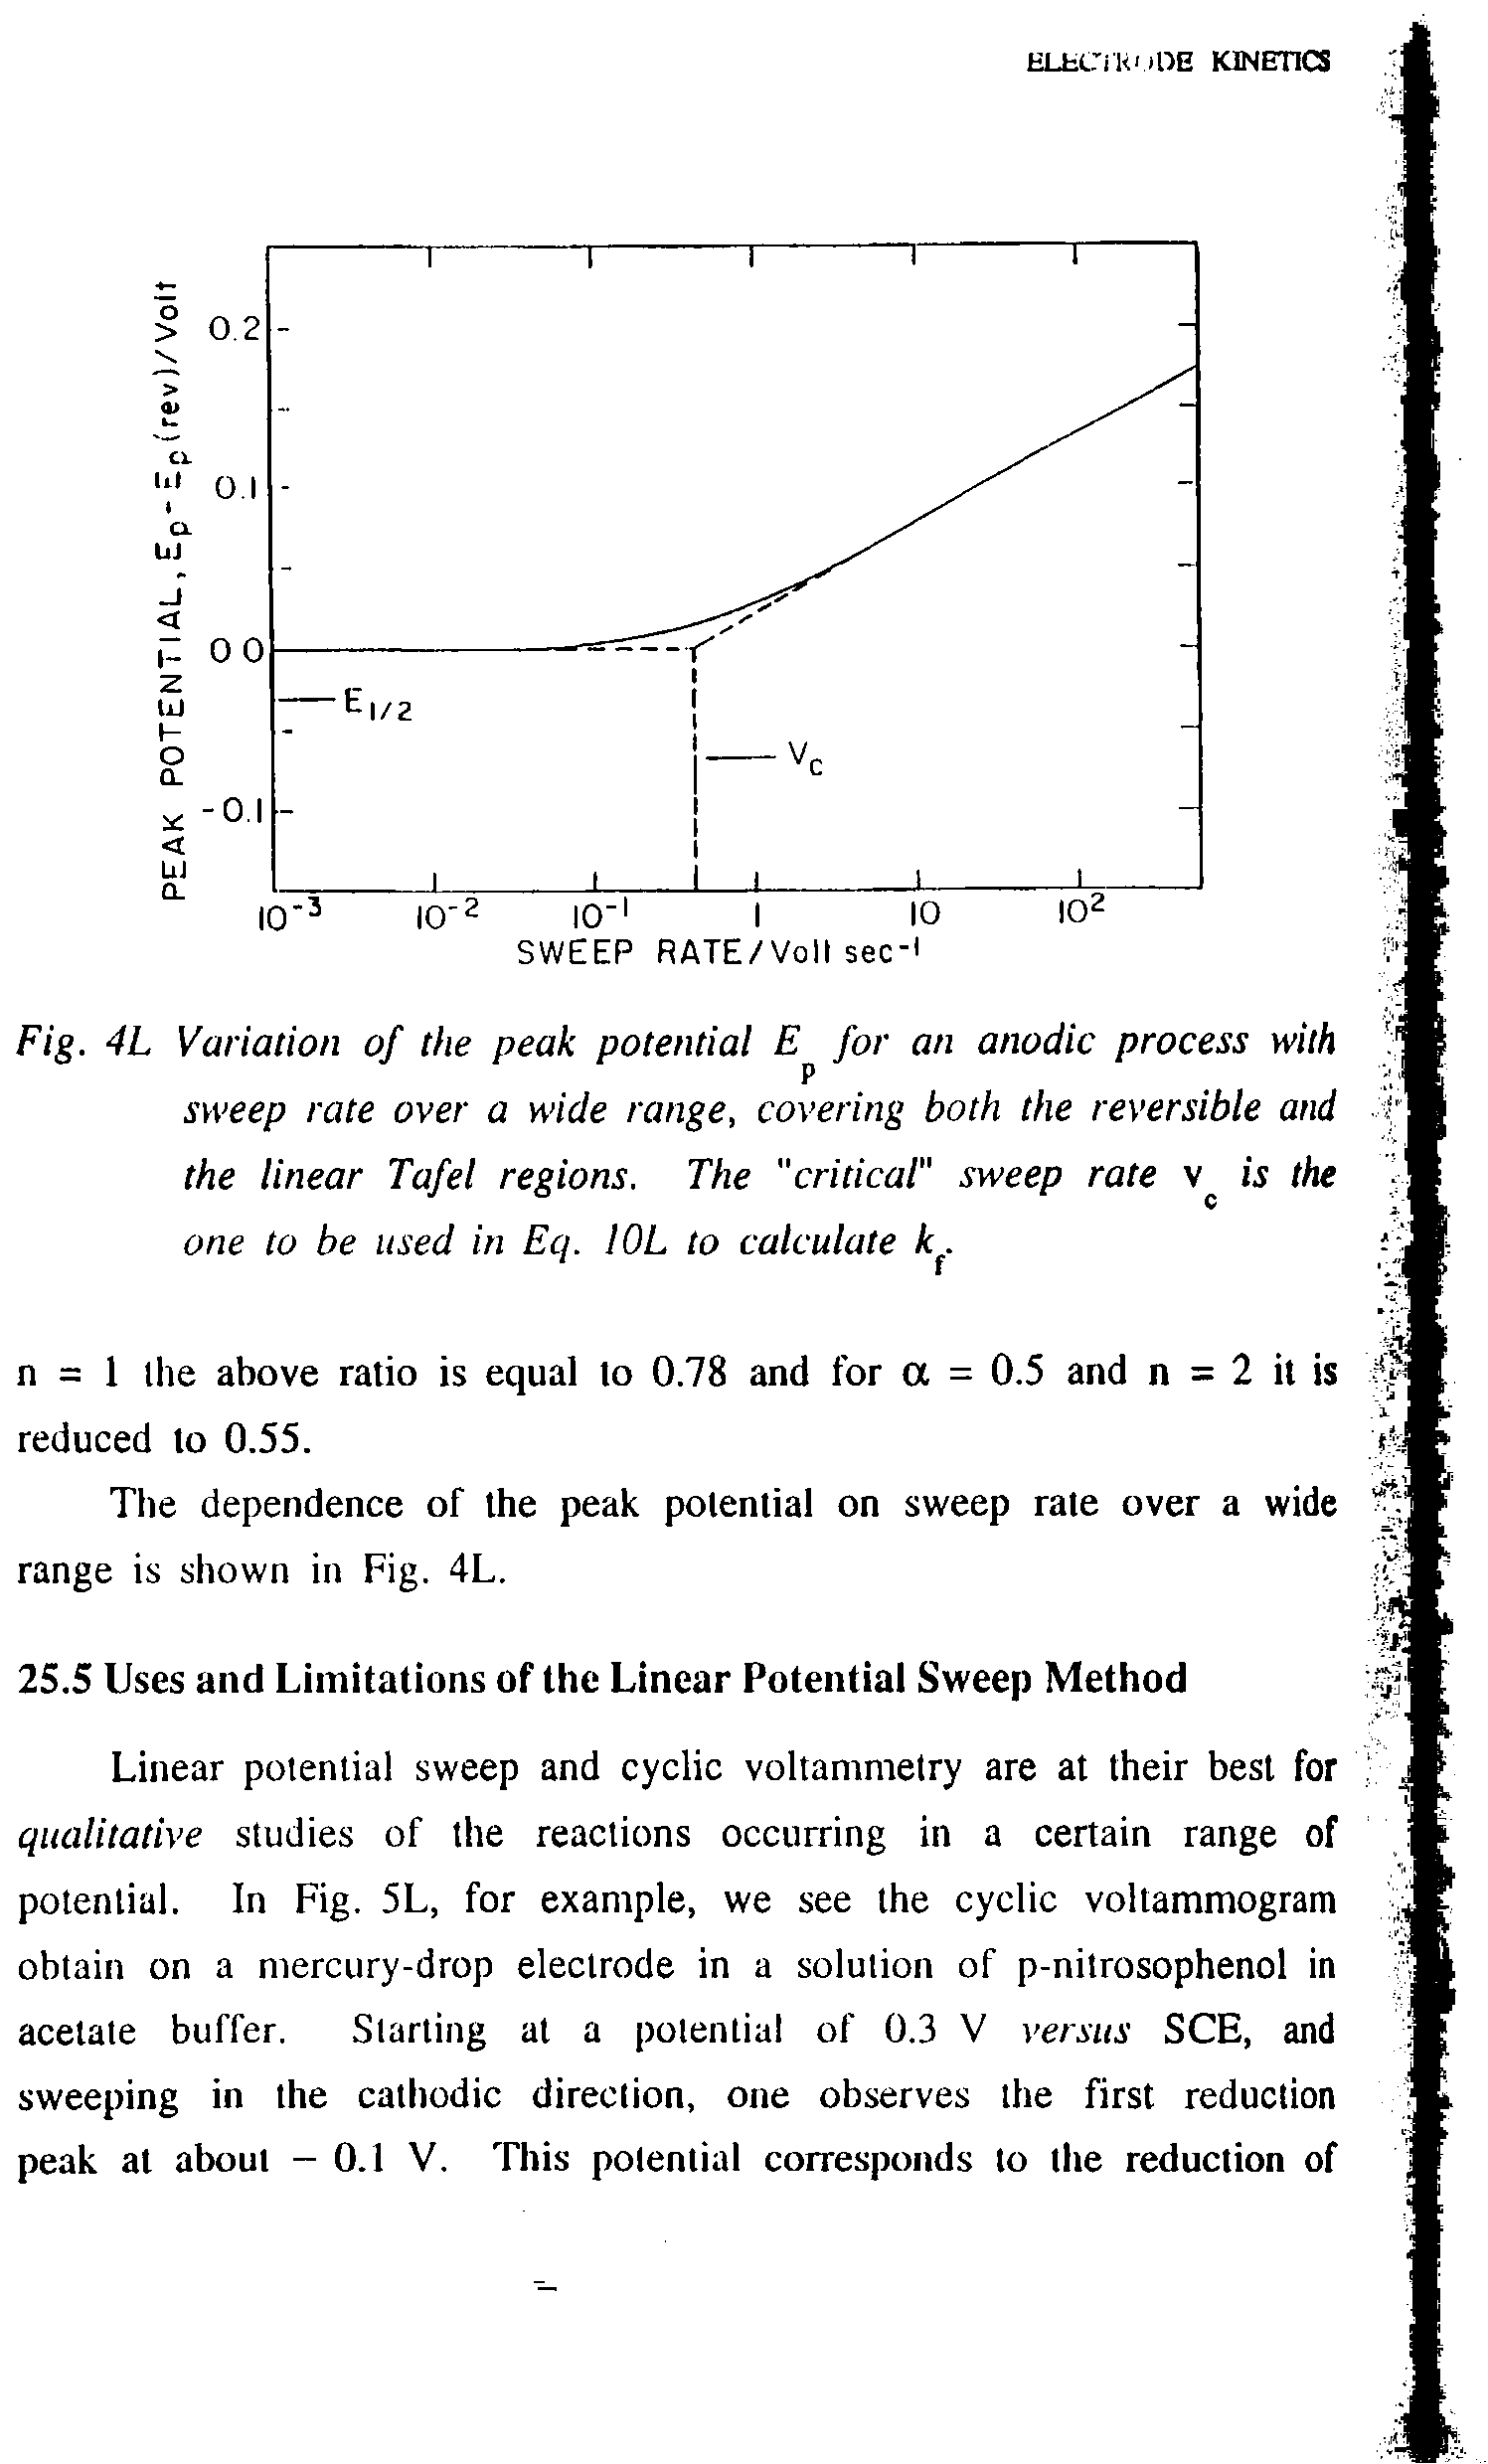 Fig. 4L Variation of the peak potential for an anodic process with sweep rate over a wide range, covering both the reversible and the linear Tafel regions. The "critical" sweep rate v is the...